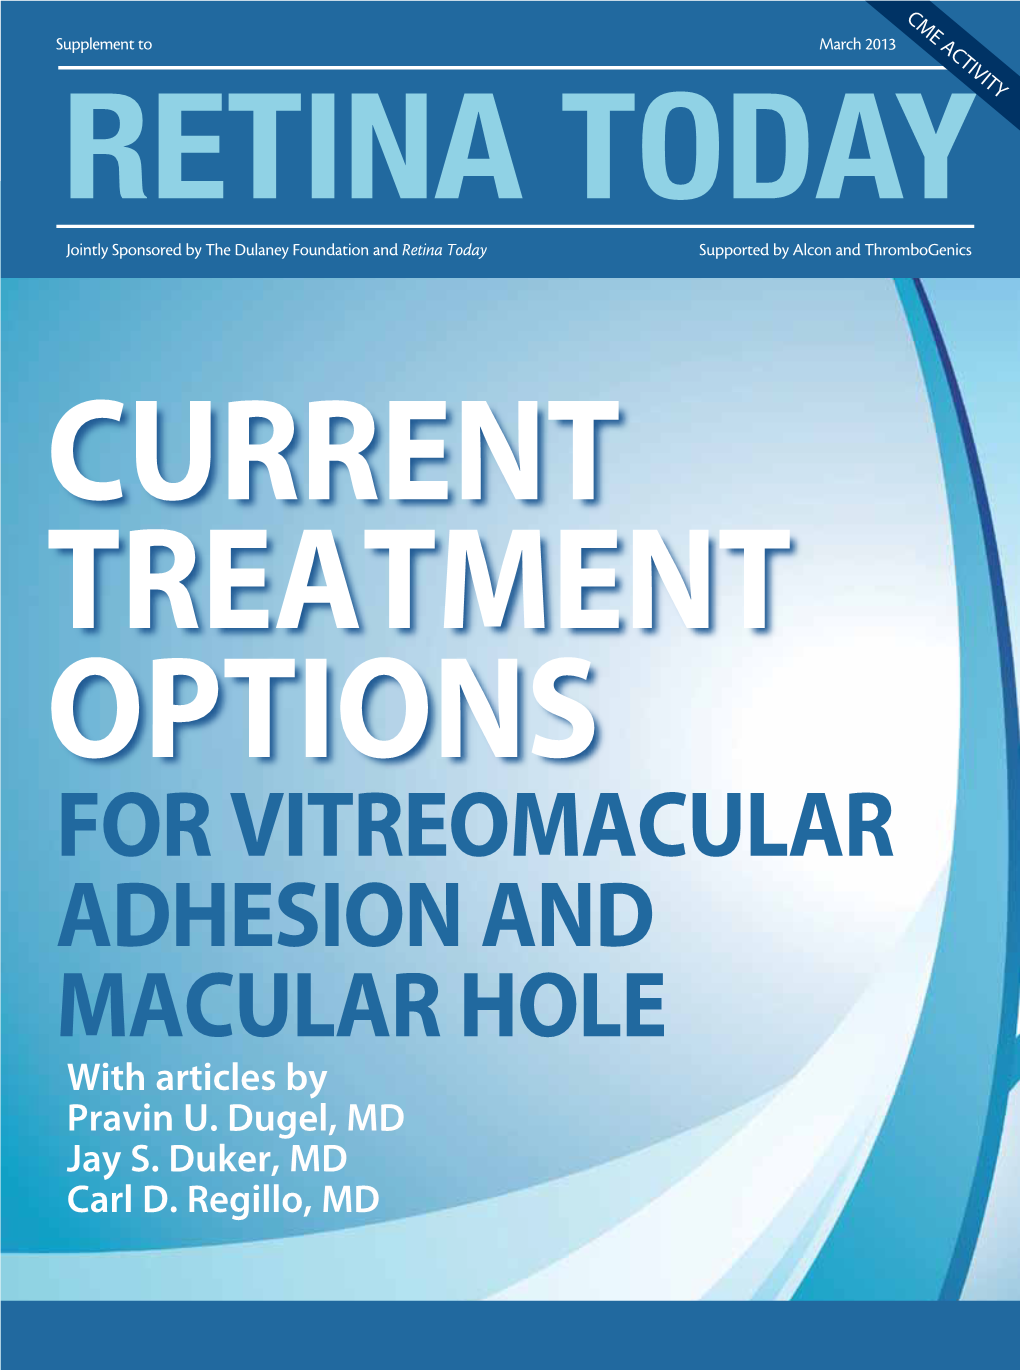 For Vitreomacular Adhesion and Macular Hole with Articles by Pravin U